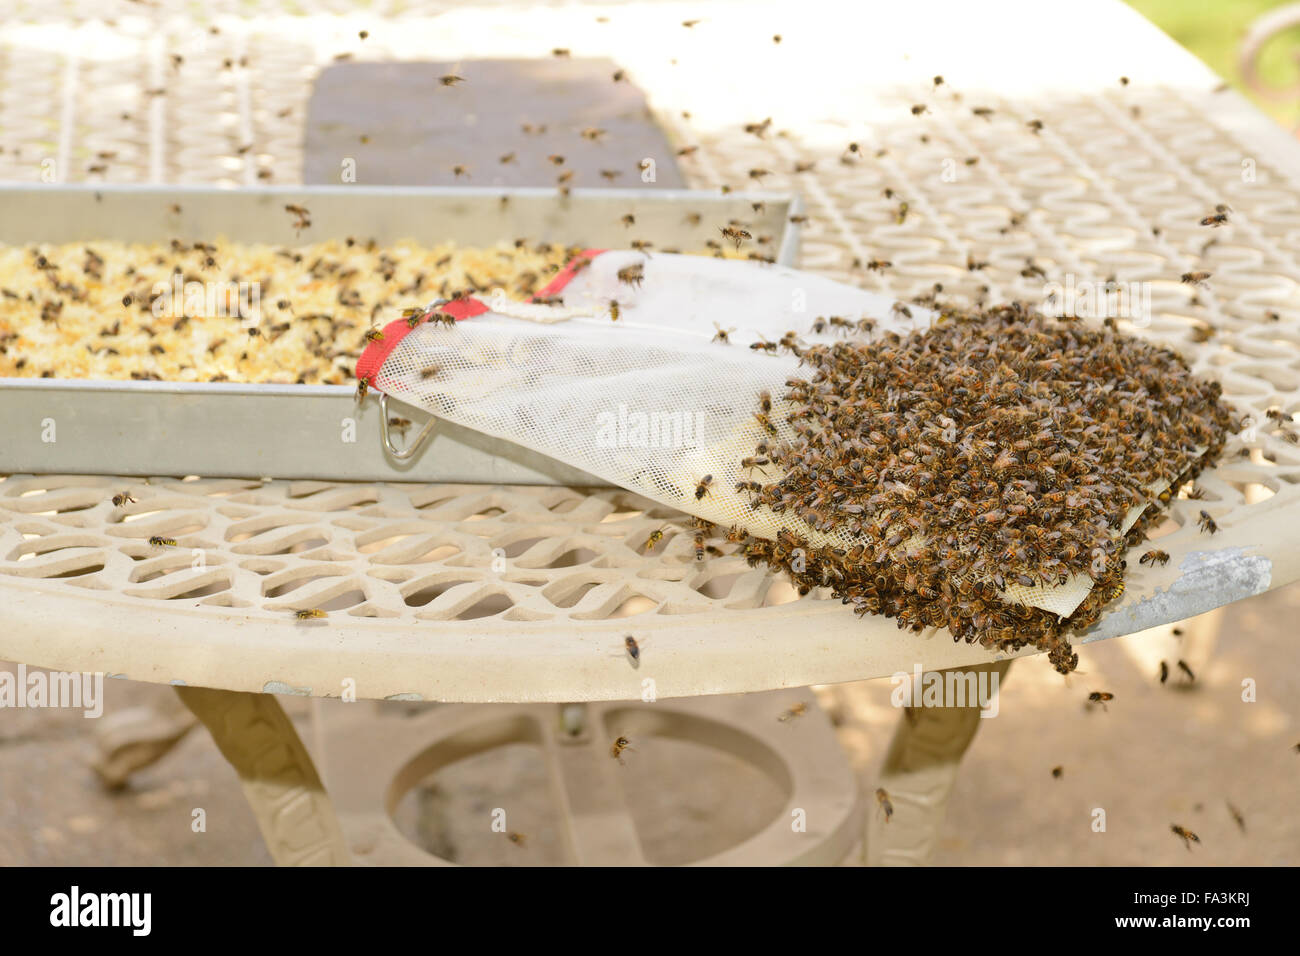 Honey bees cleaning up the beeswax bag that sits inside the honey extractor Stock Photo